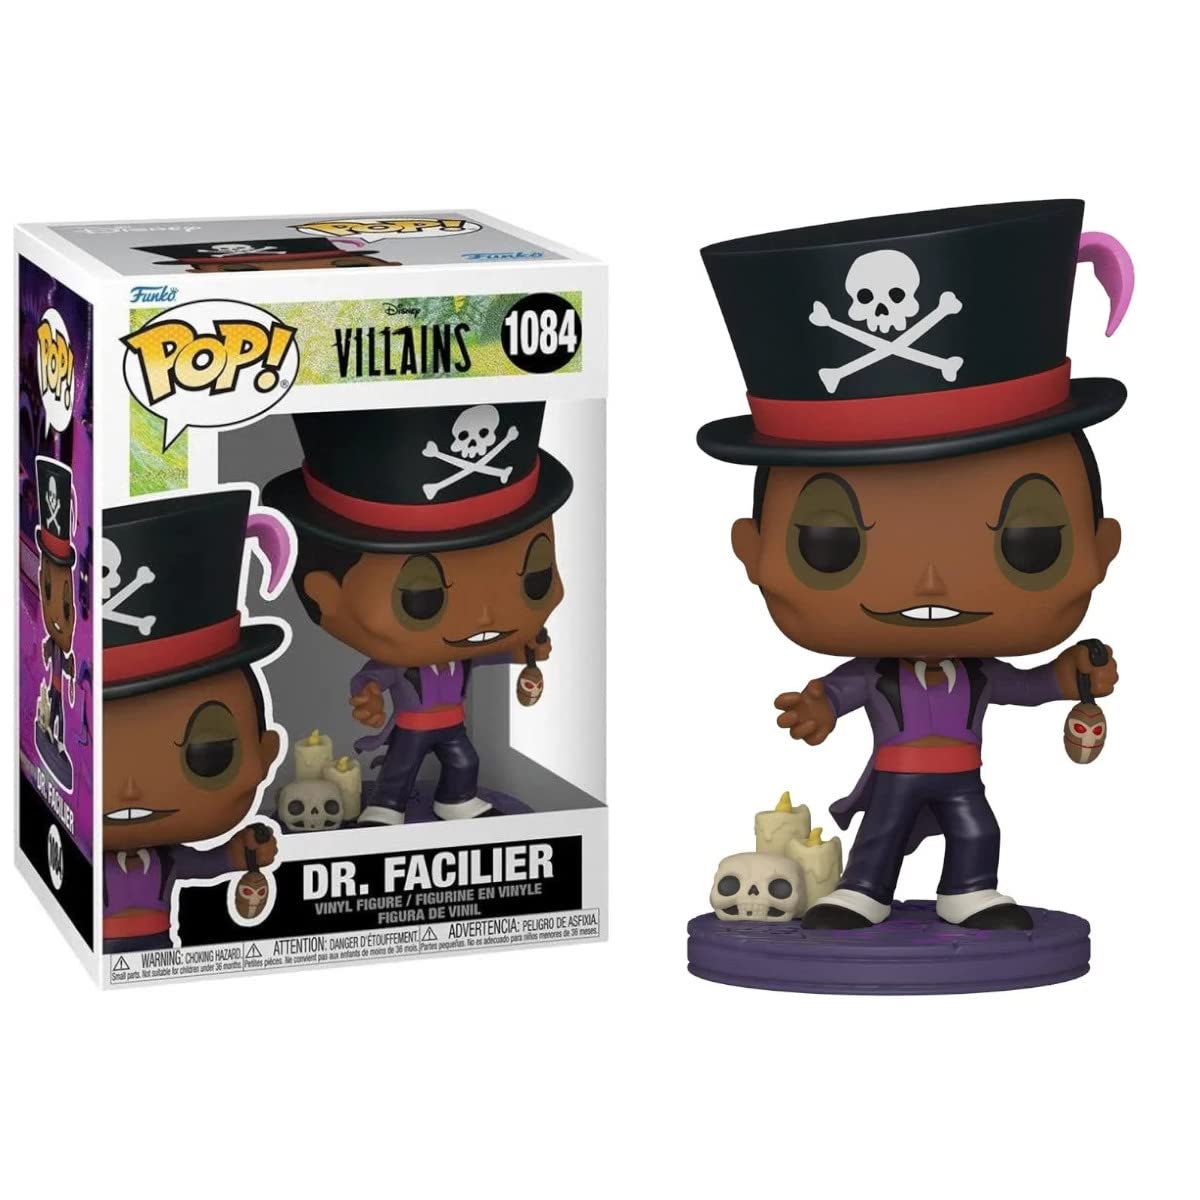 Funko Pop! Disney Princess and the Frog Dr. Facilier #1084 in stock